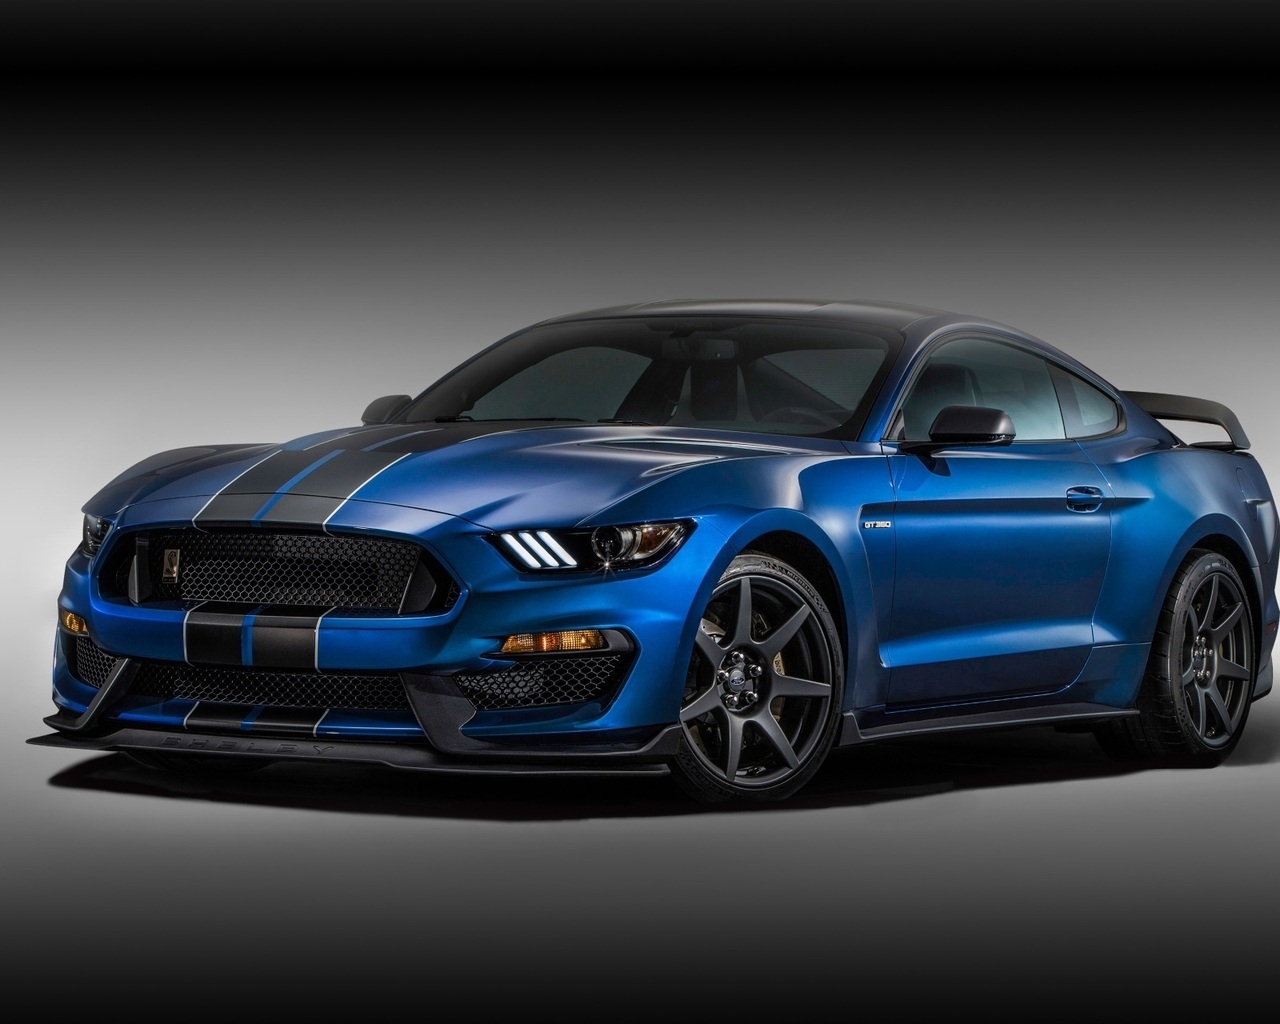 Ford Mustang Shelby GT350R for 1280 x 1024 resolution